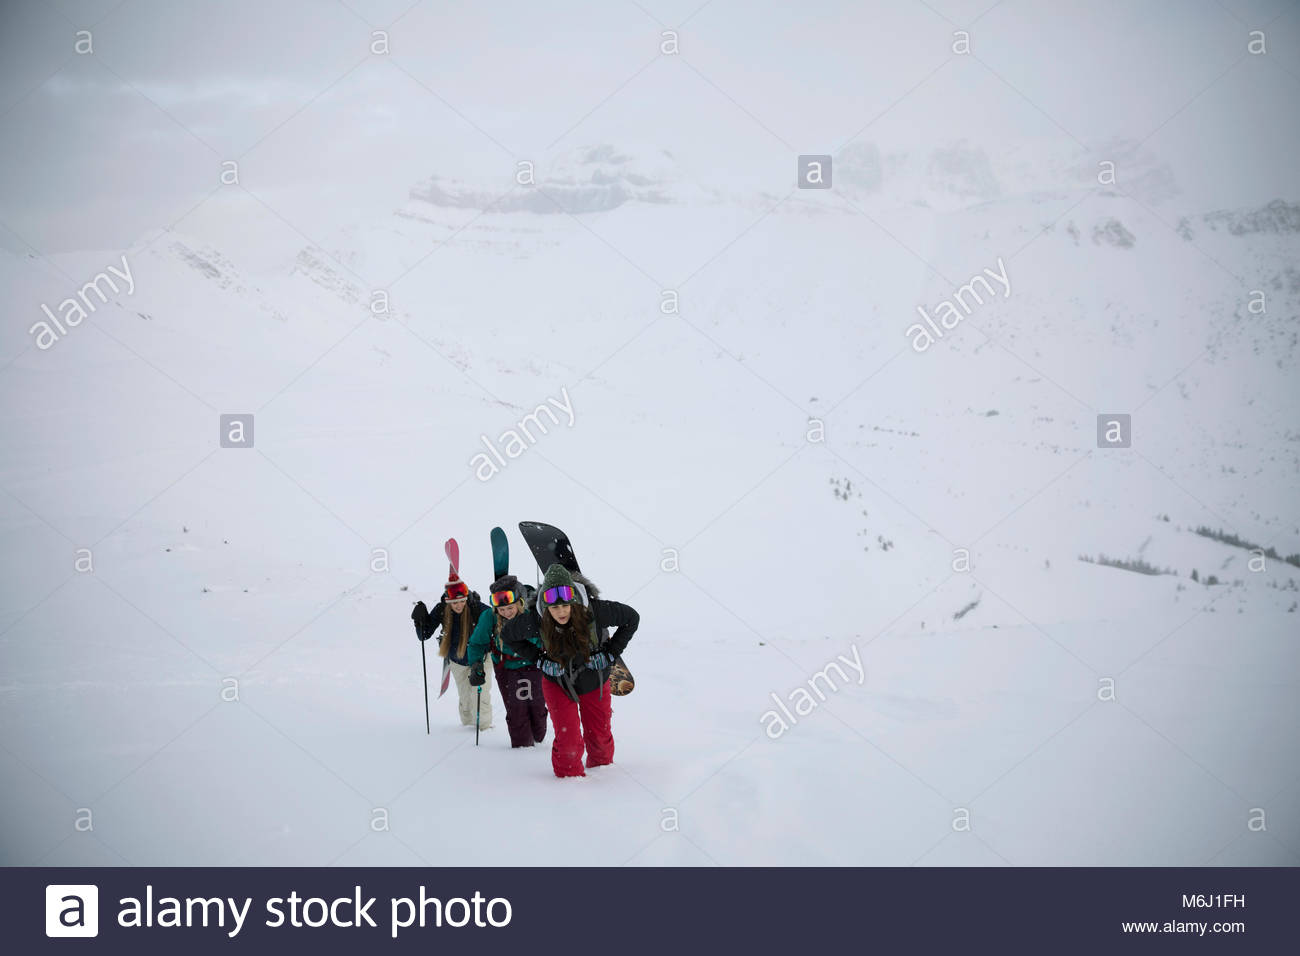 Female skier and snowboarder friends hiking up snow covered hill Stock Photo